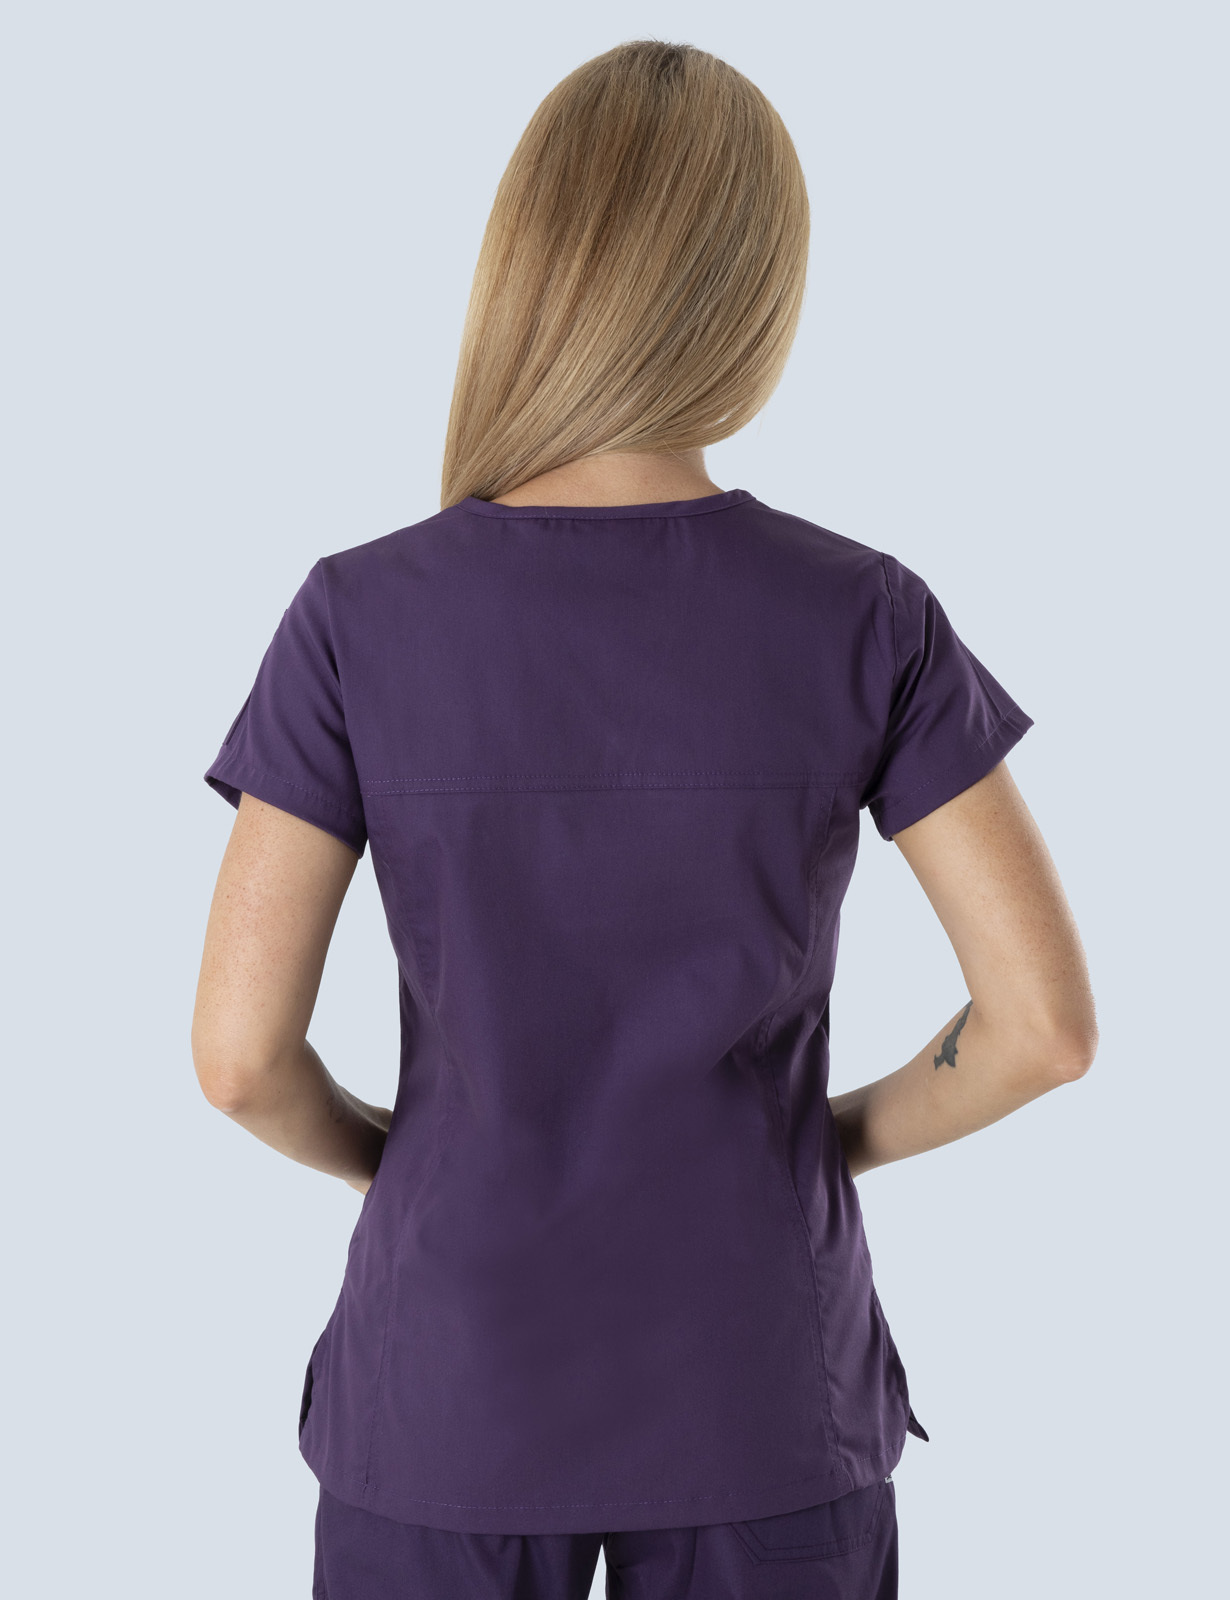 Women's Fit Solid Scrub Top - Aubergine - 2X Large